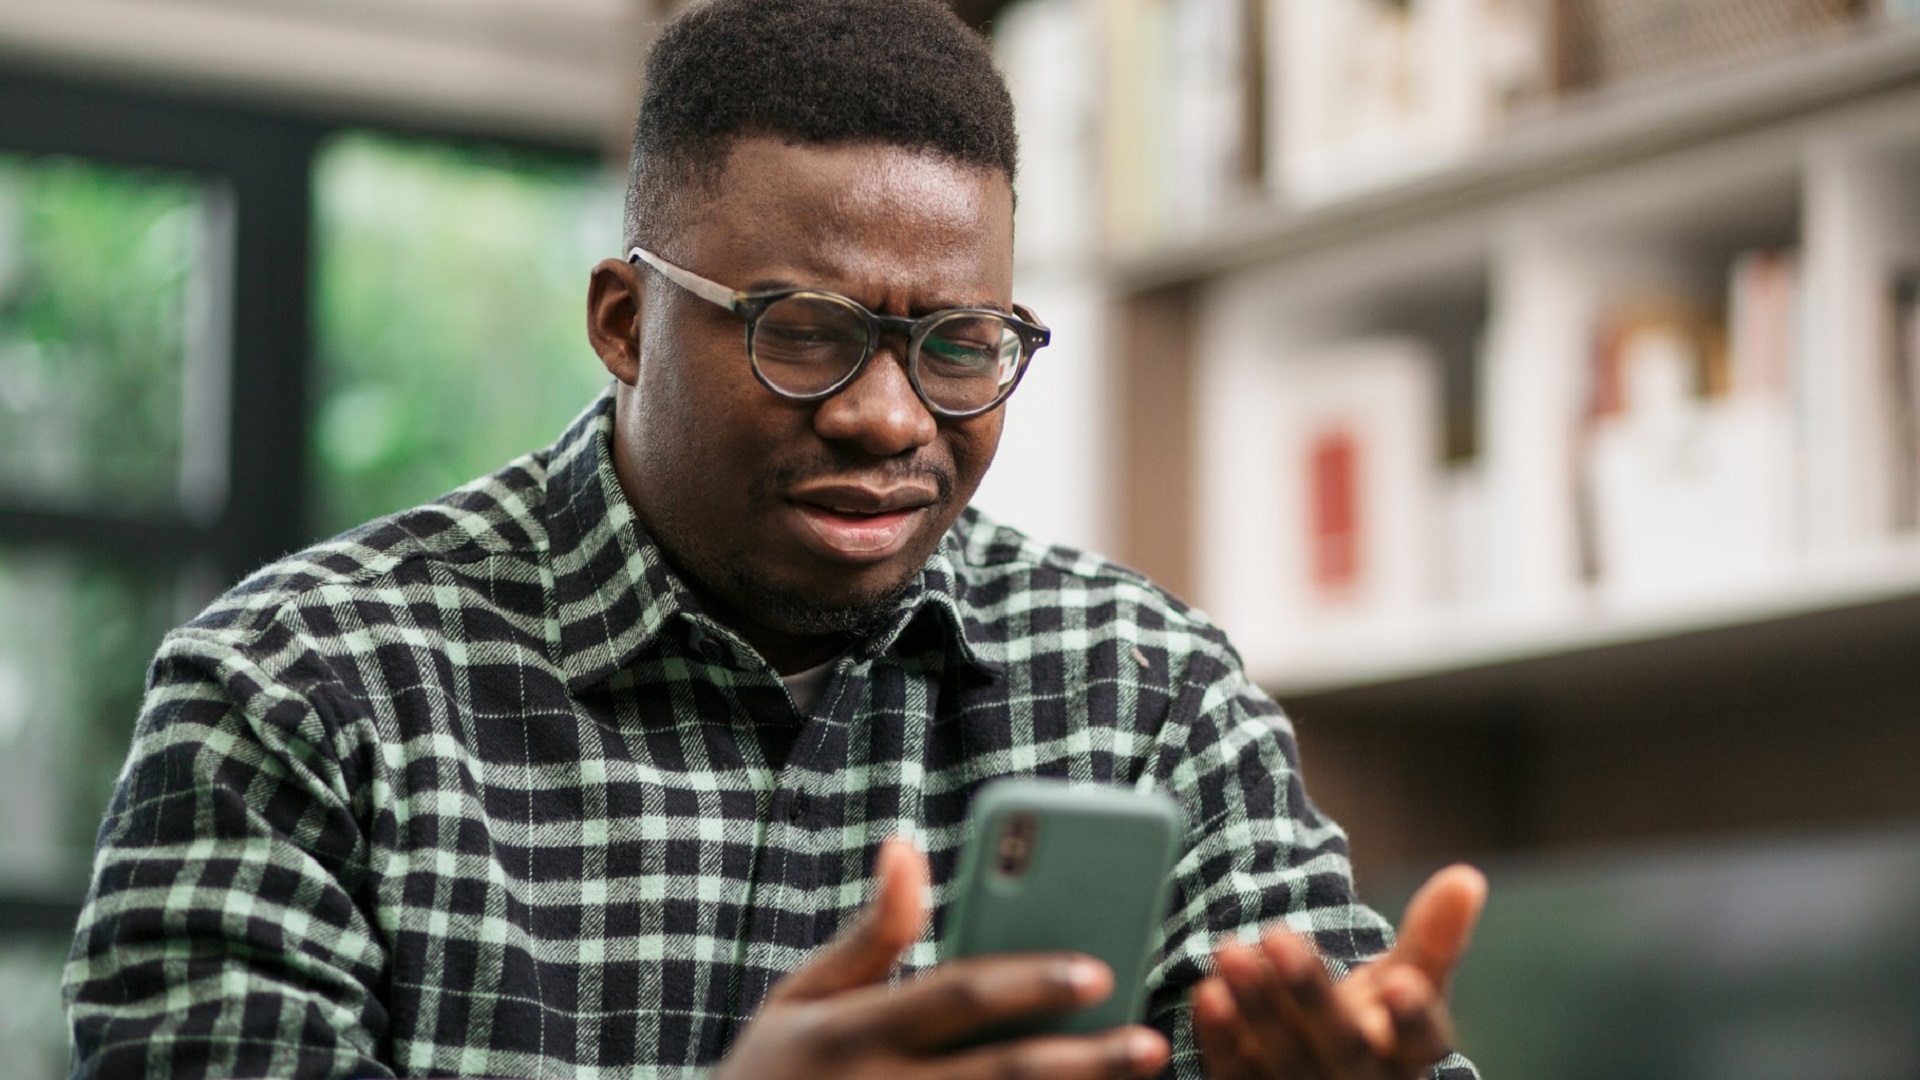 man glasses upset angry confused smartphone_iStock-1289427419